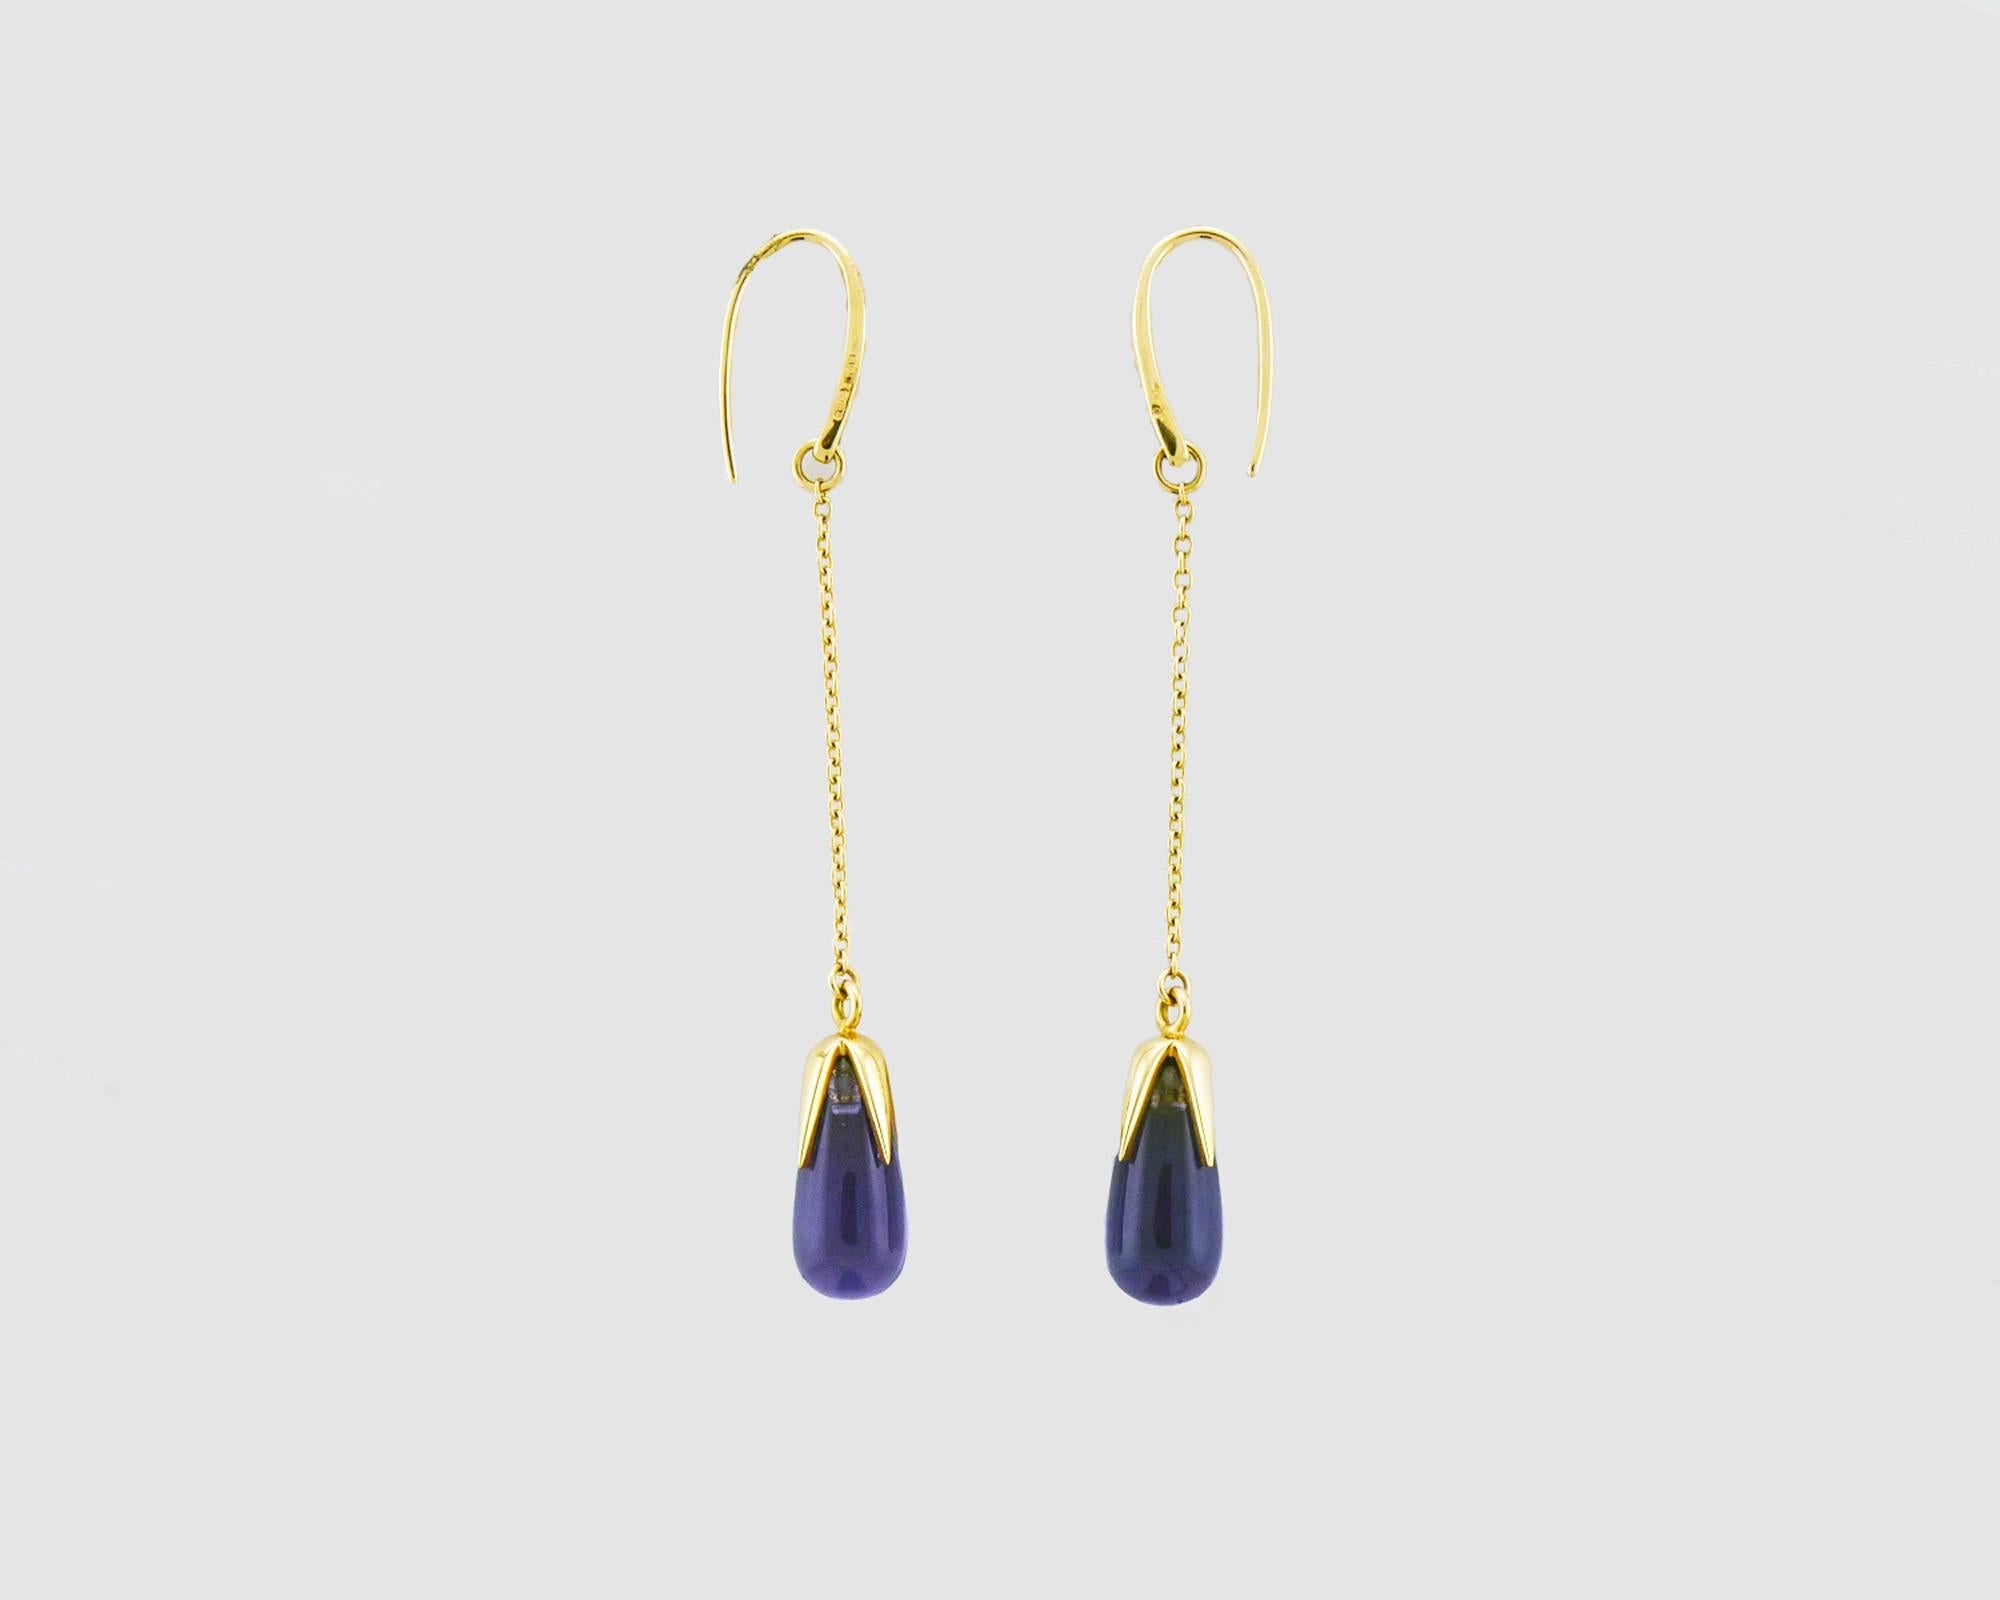 This authentic pair of earrings are by Pomellato, they are crafted from solid 18k rose gold with a polished finish featuring a dangling tear drop like shape amethyst. It is signed by the designer with the metal content.

Material: 18k rose gold